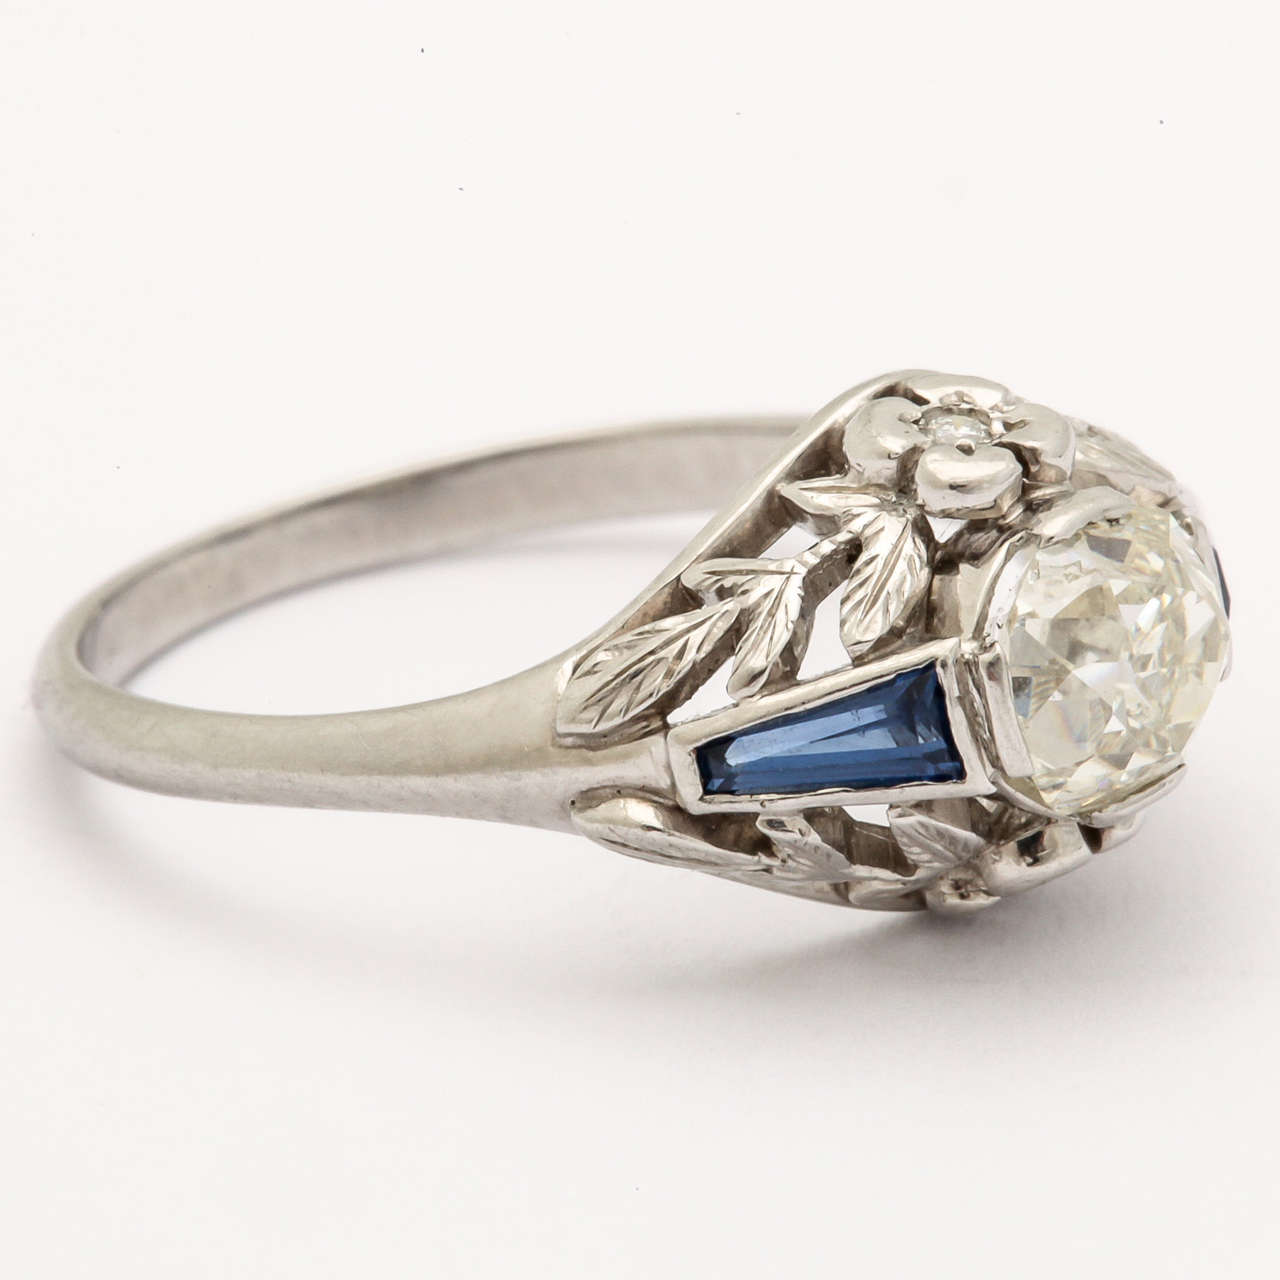 This gorgeous antique deco style platinum ring will give you years of wear and transition into a family heirloom. The old mine, cushion  cut diamond is .89 ct with a beautiful sparkle. On either side of the center stone are specially cut tapered